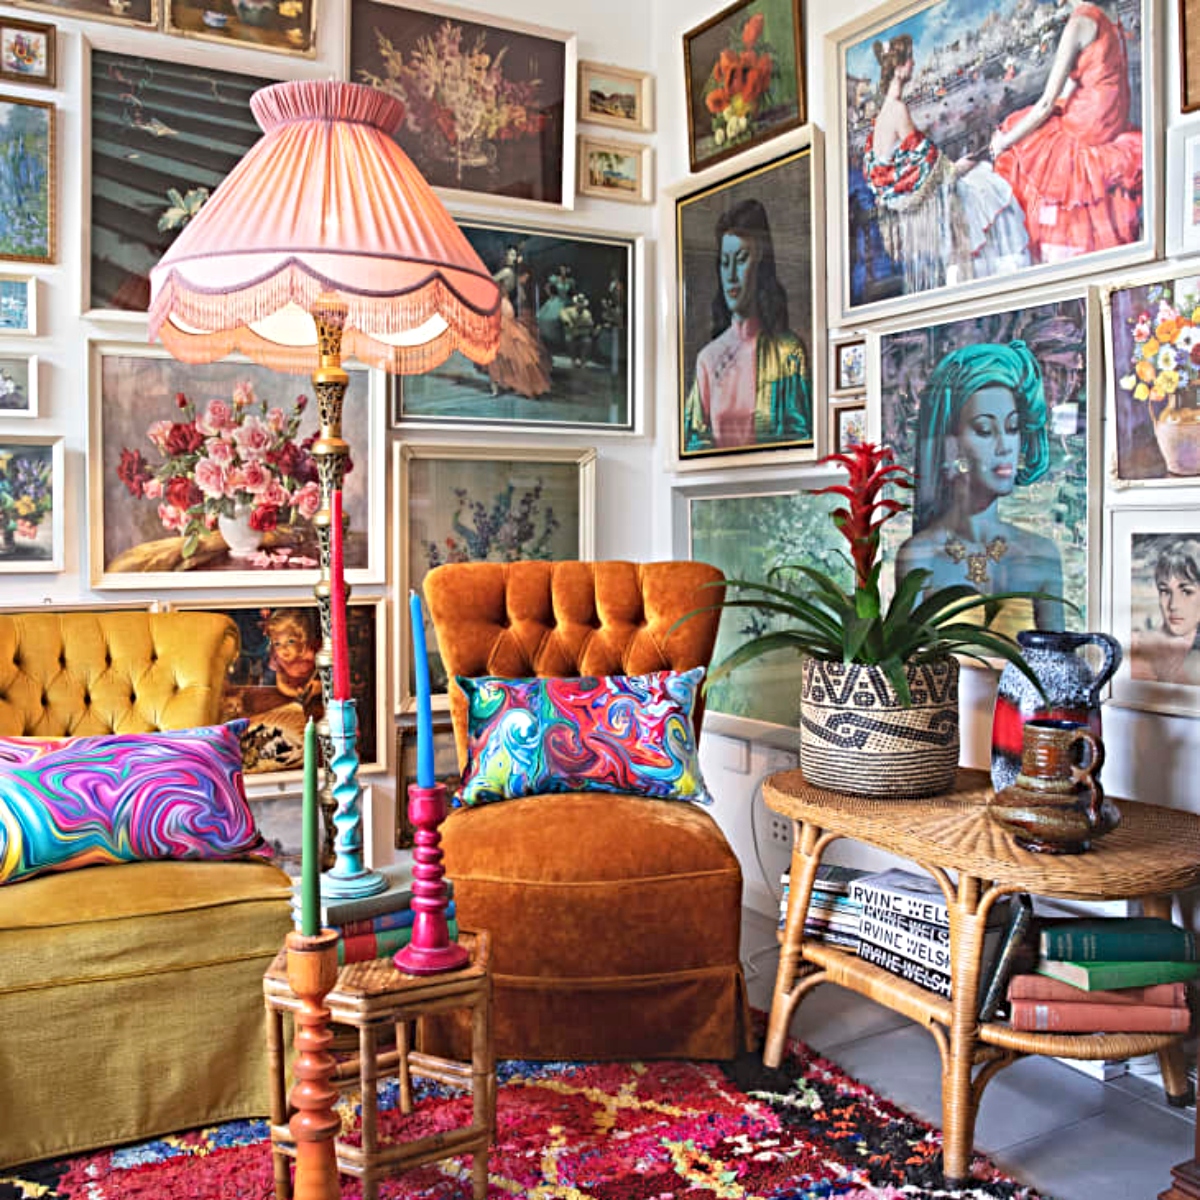 Urban Bohemian: Eclectic Living Room Design Ideas for City Dwellers